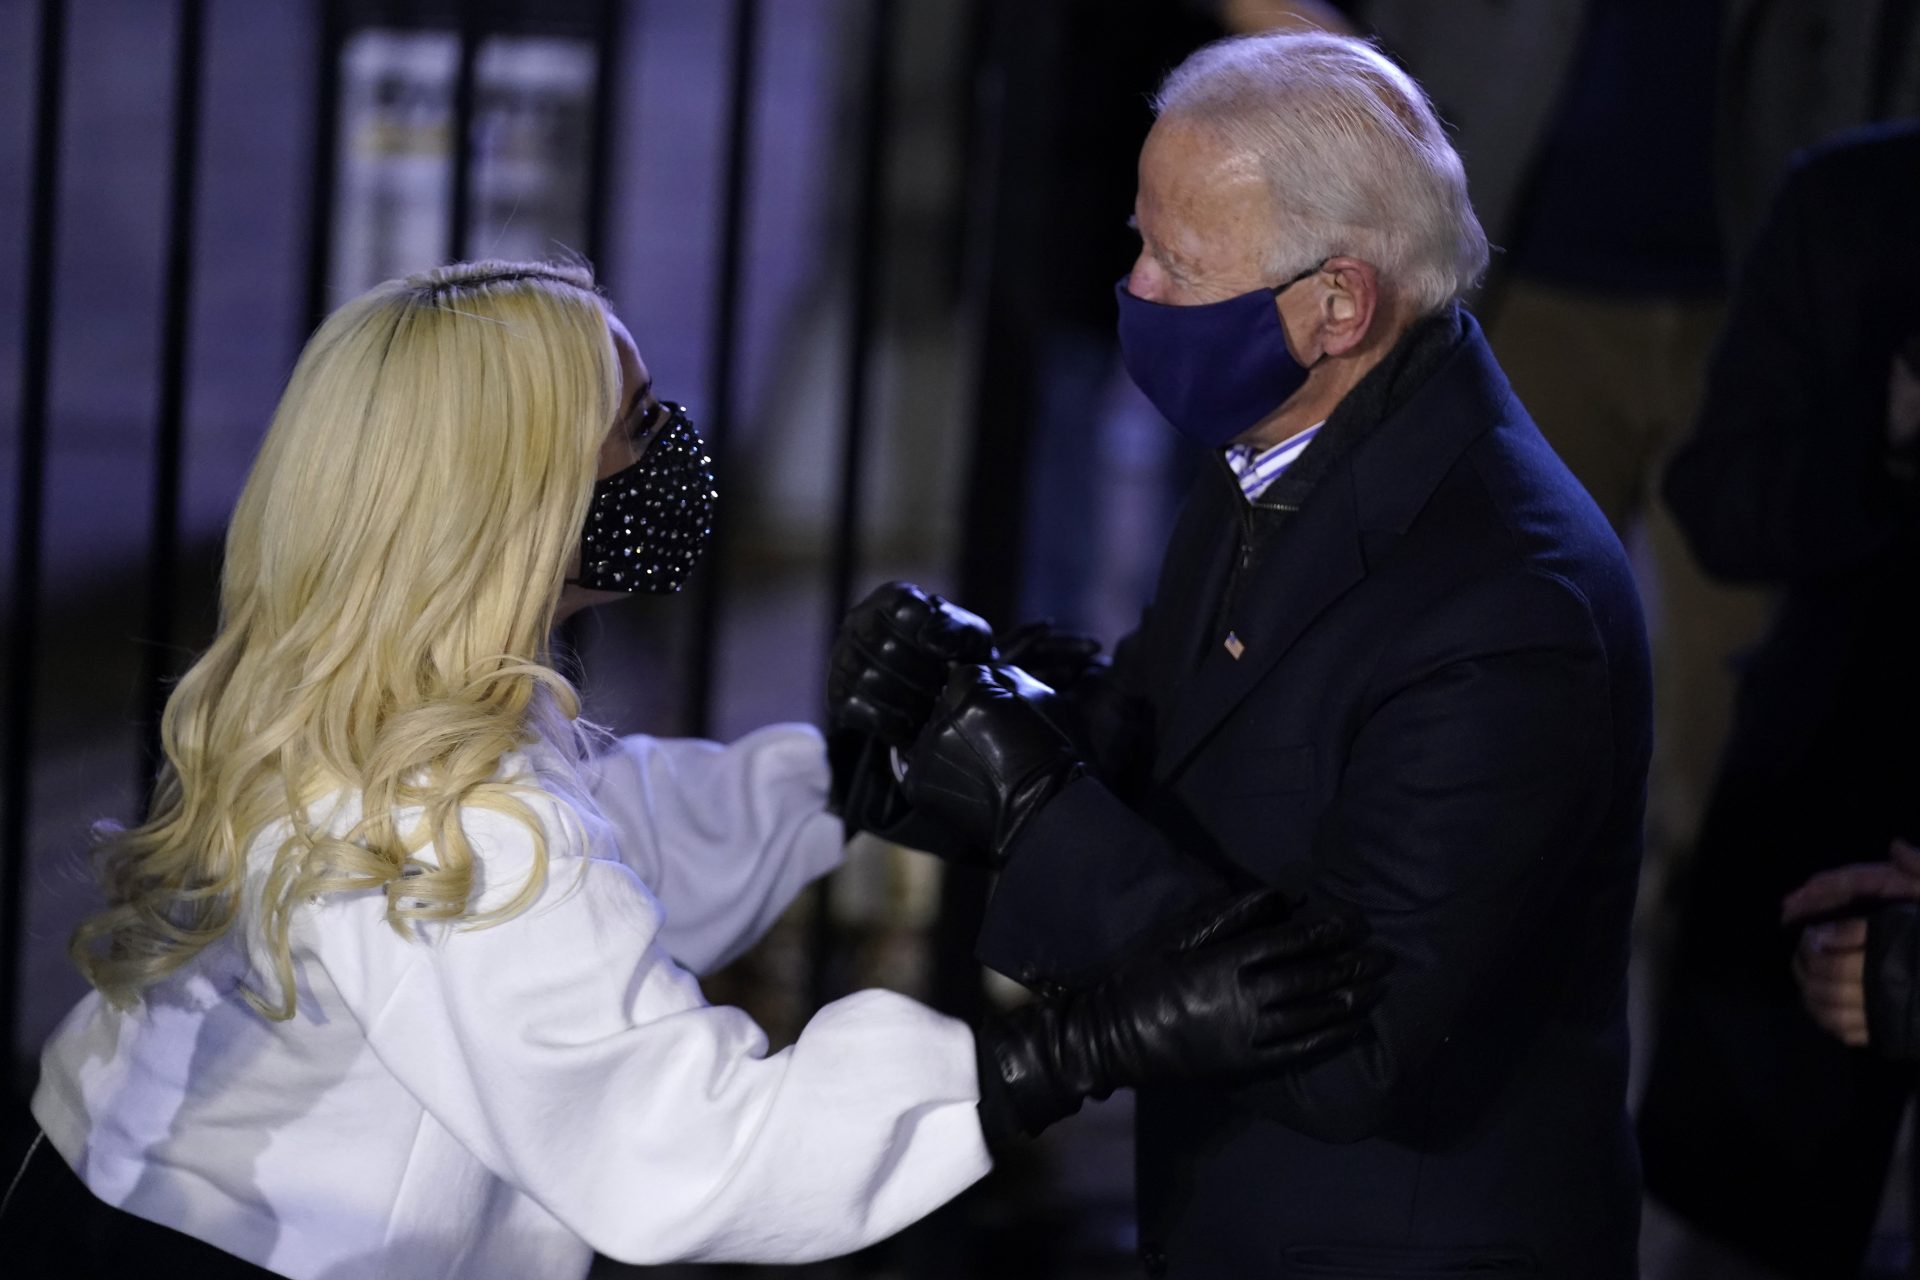 Woman Gaga Performs At Joe Biden’s Closing Campaign Rally: “It’s Going To Be Very Determined What This Country Is, The next day”